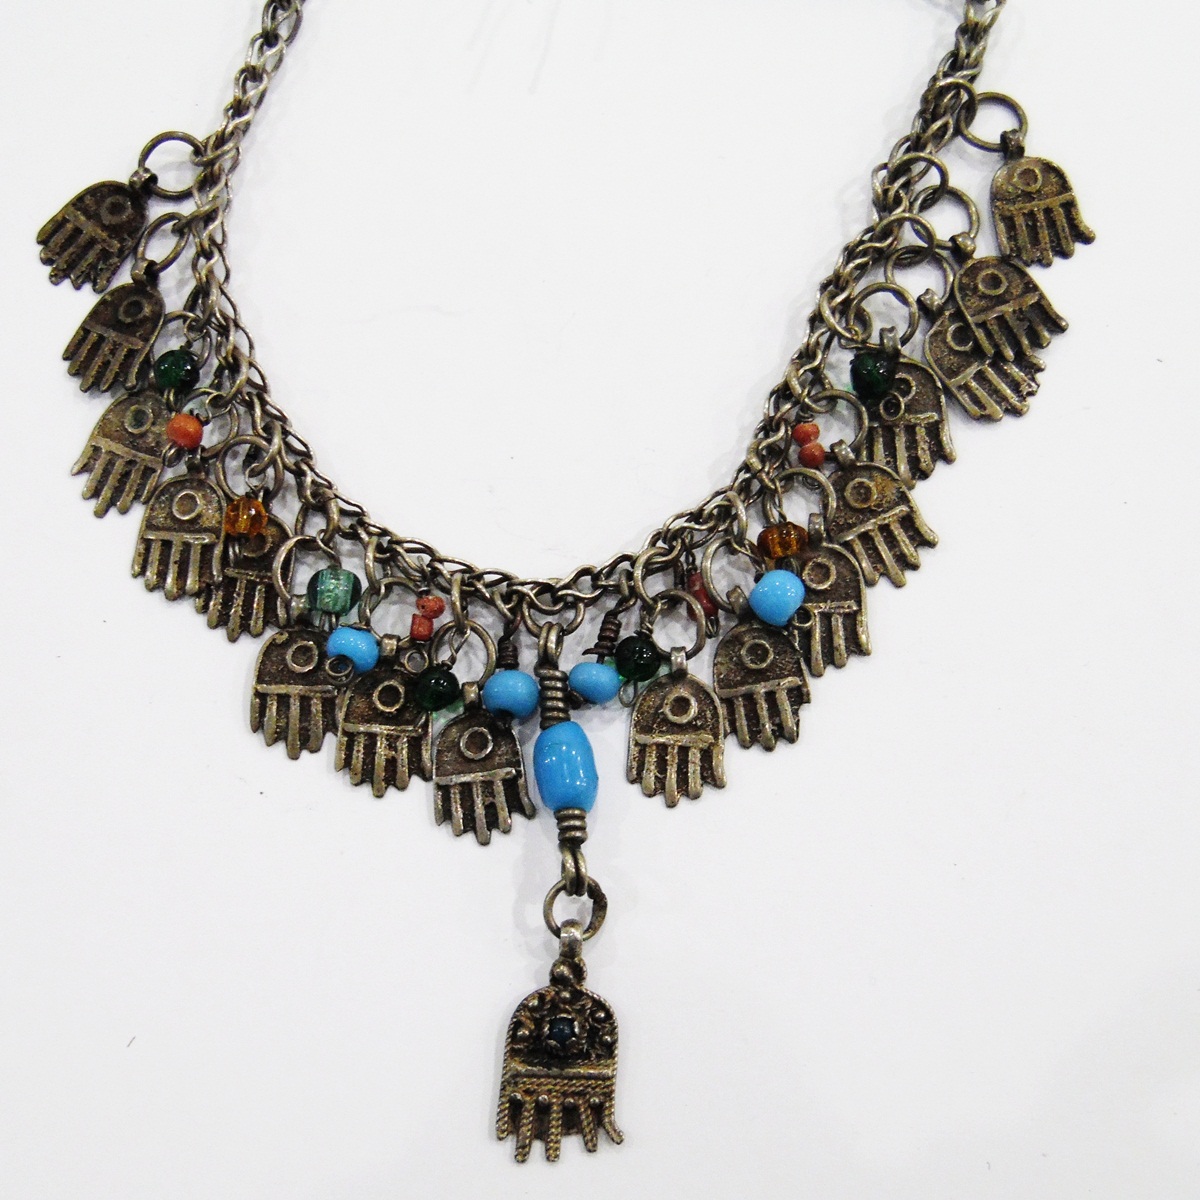 North African white metal necklace hung with glass beads and hamsa hand charms - Image 2 of 2